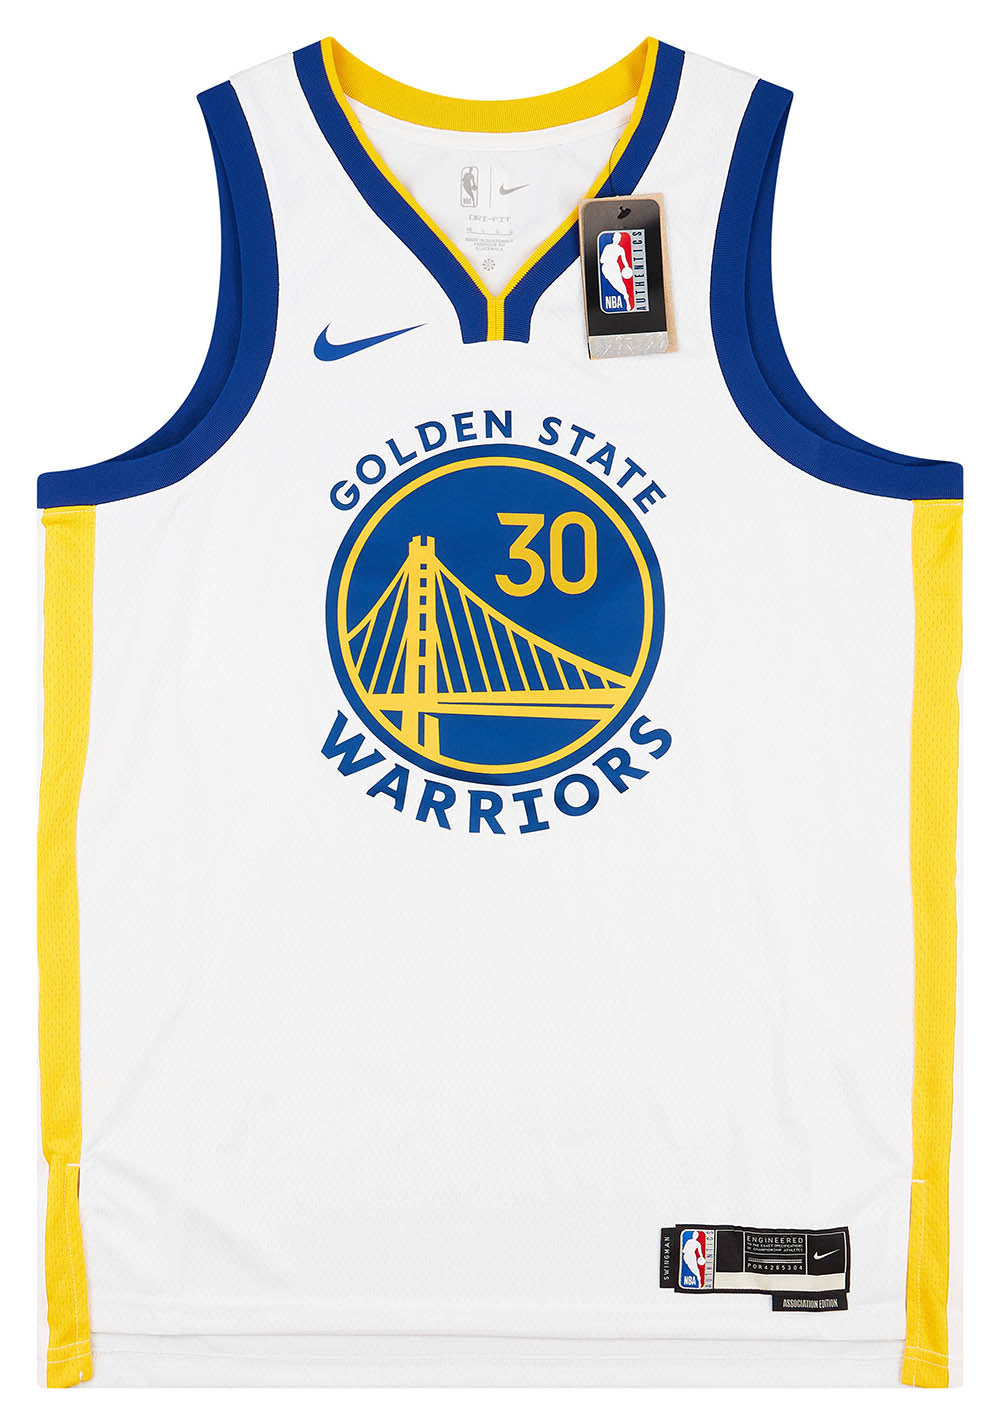 2017-23 GOLDEN STATE WARRIORS CURRY #30 NIKE SWINGMAN JERSEY (HOME) L - W/TAGS